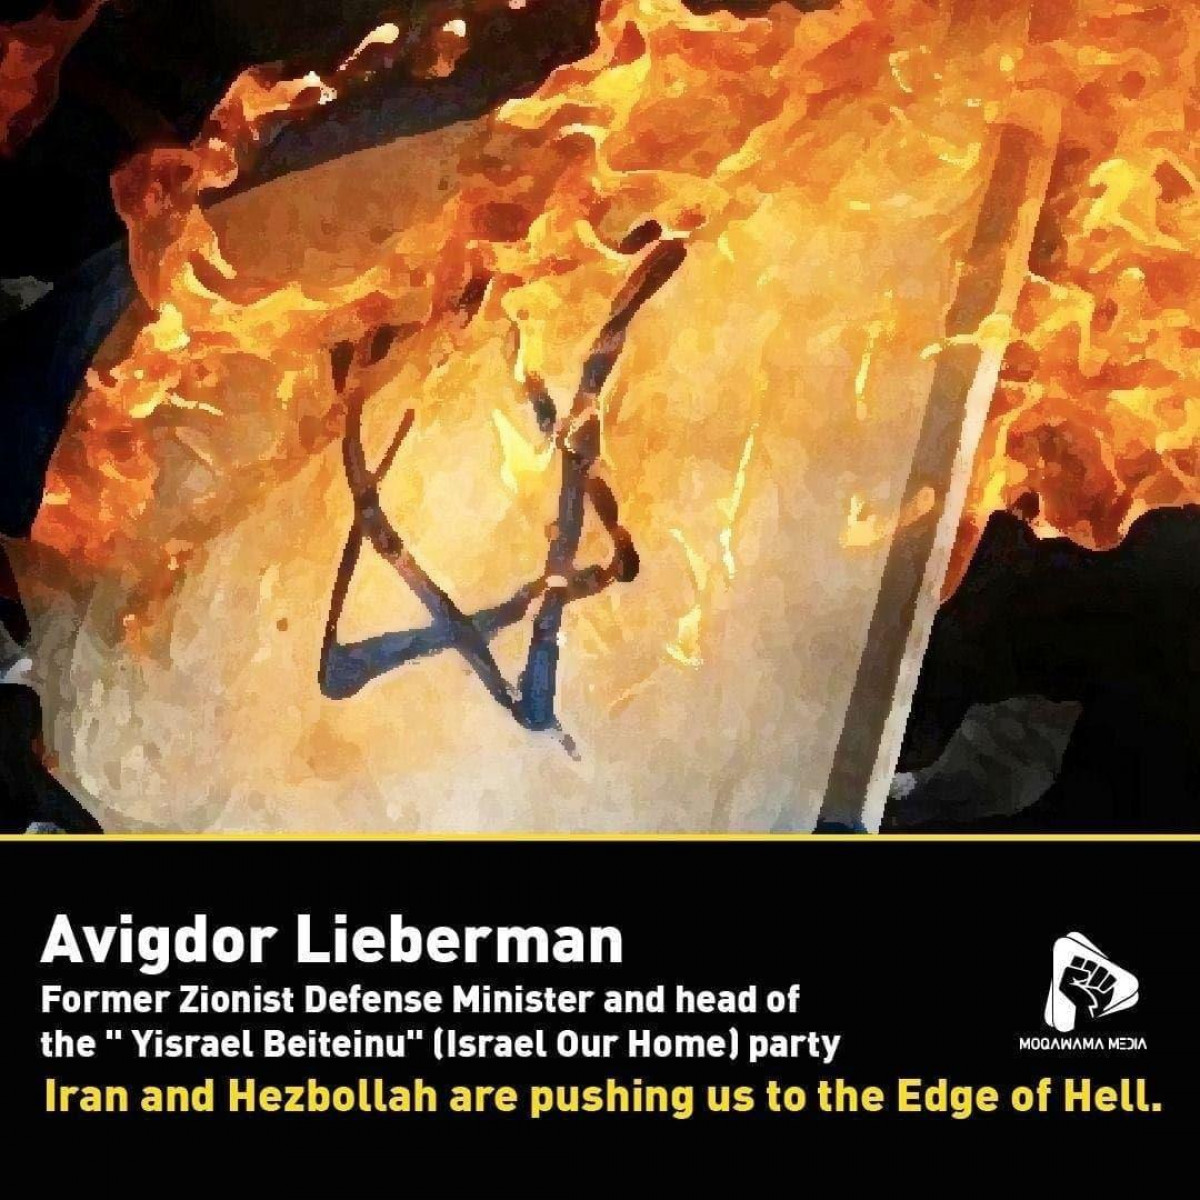 Iran and Hezbollah are pushing us to the Edge of Hell